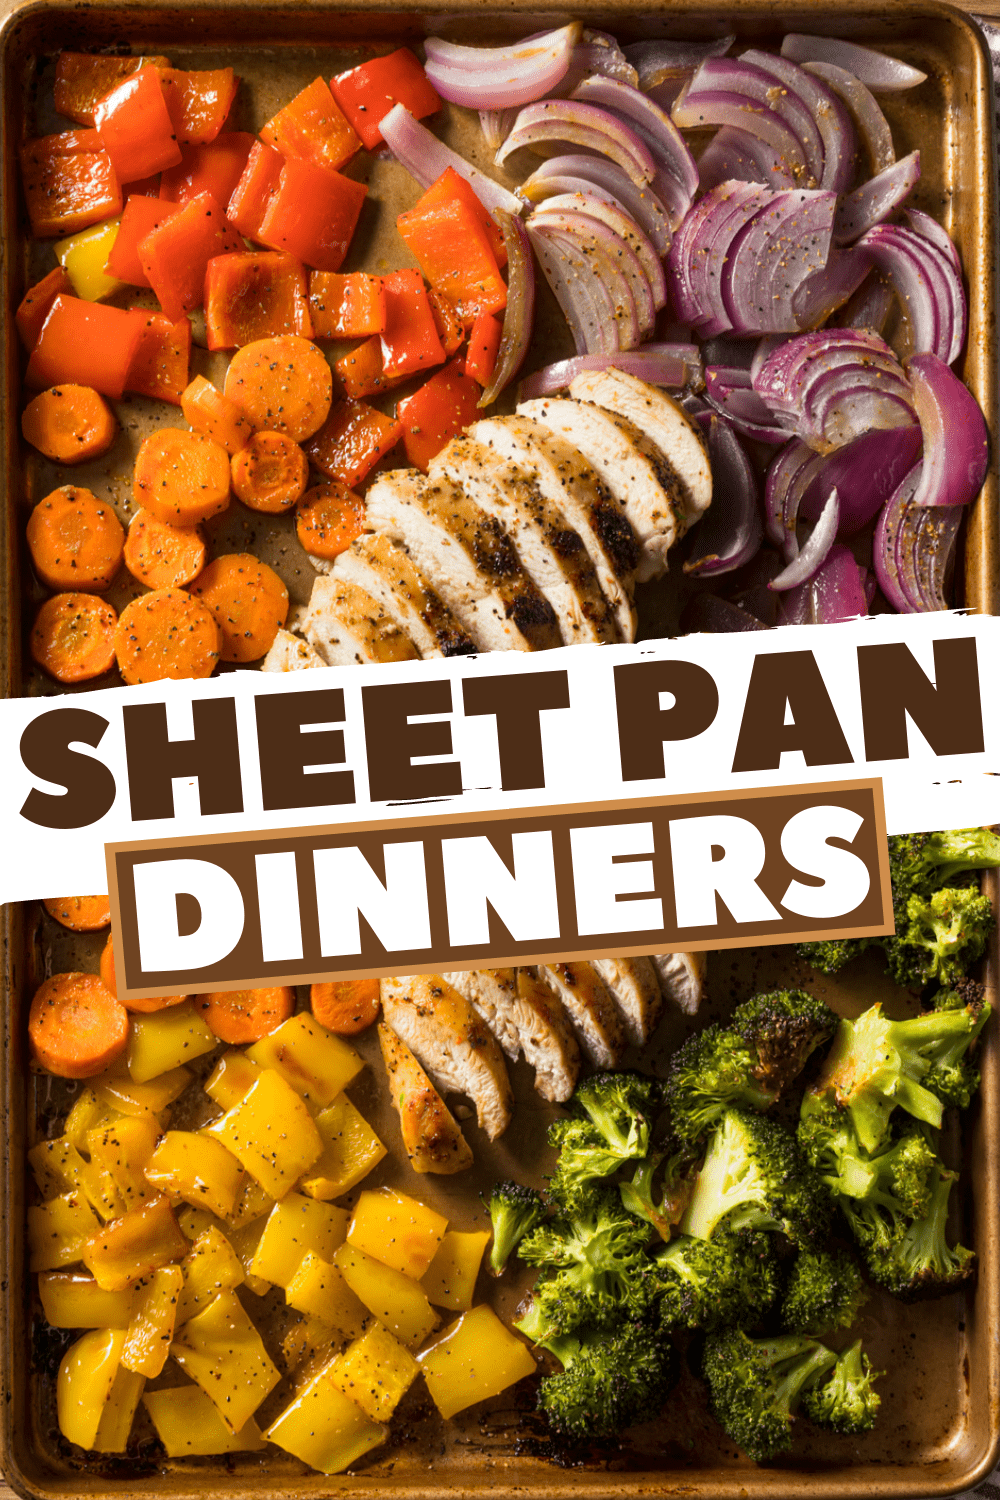 https://insanelygoodrecipes.com/wp-content/uploads/2021/03/Sheet-Pan-Dinners-1.png